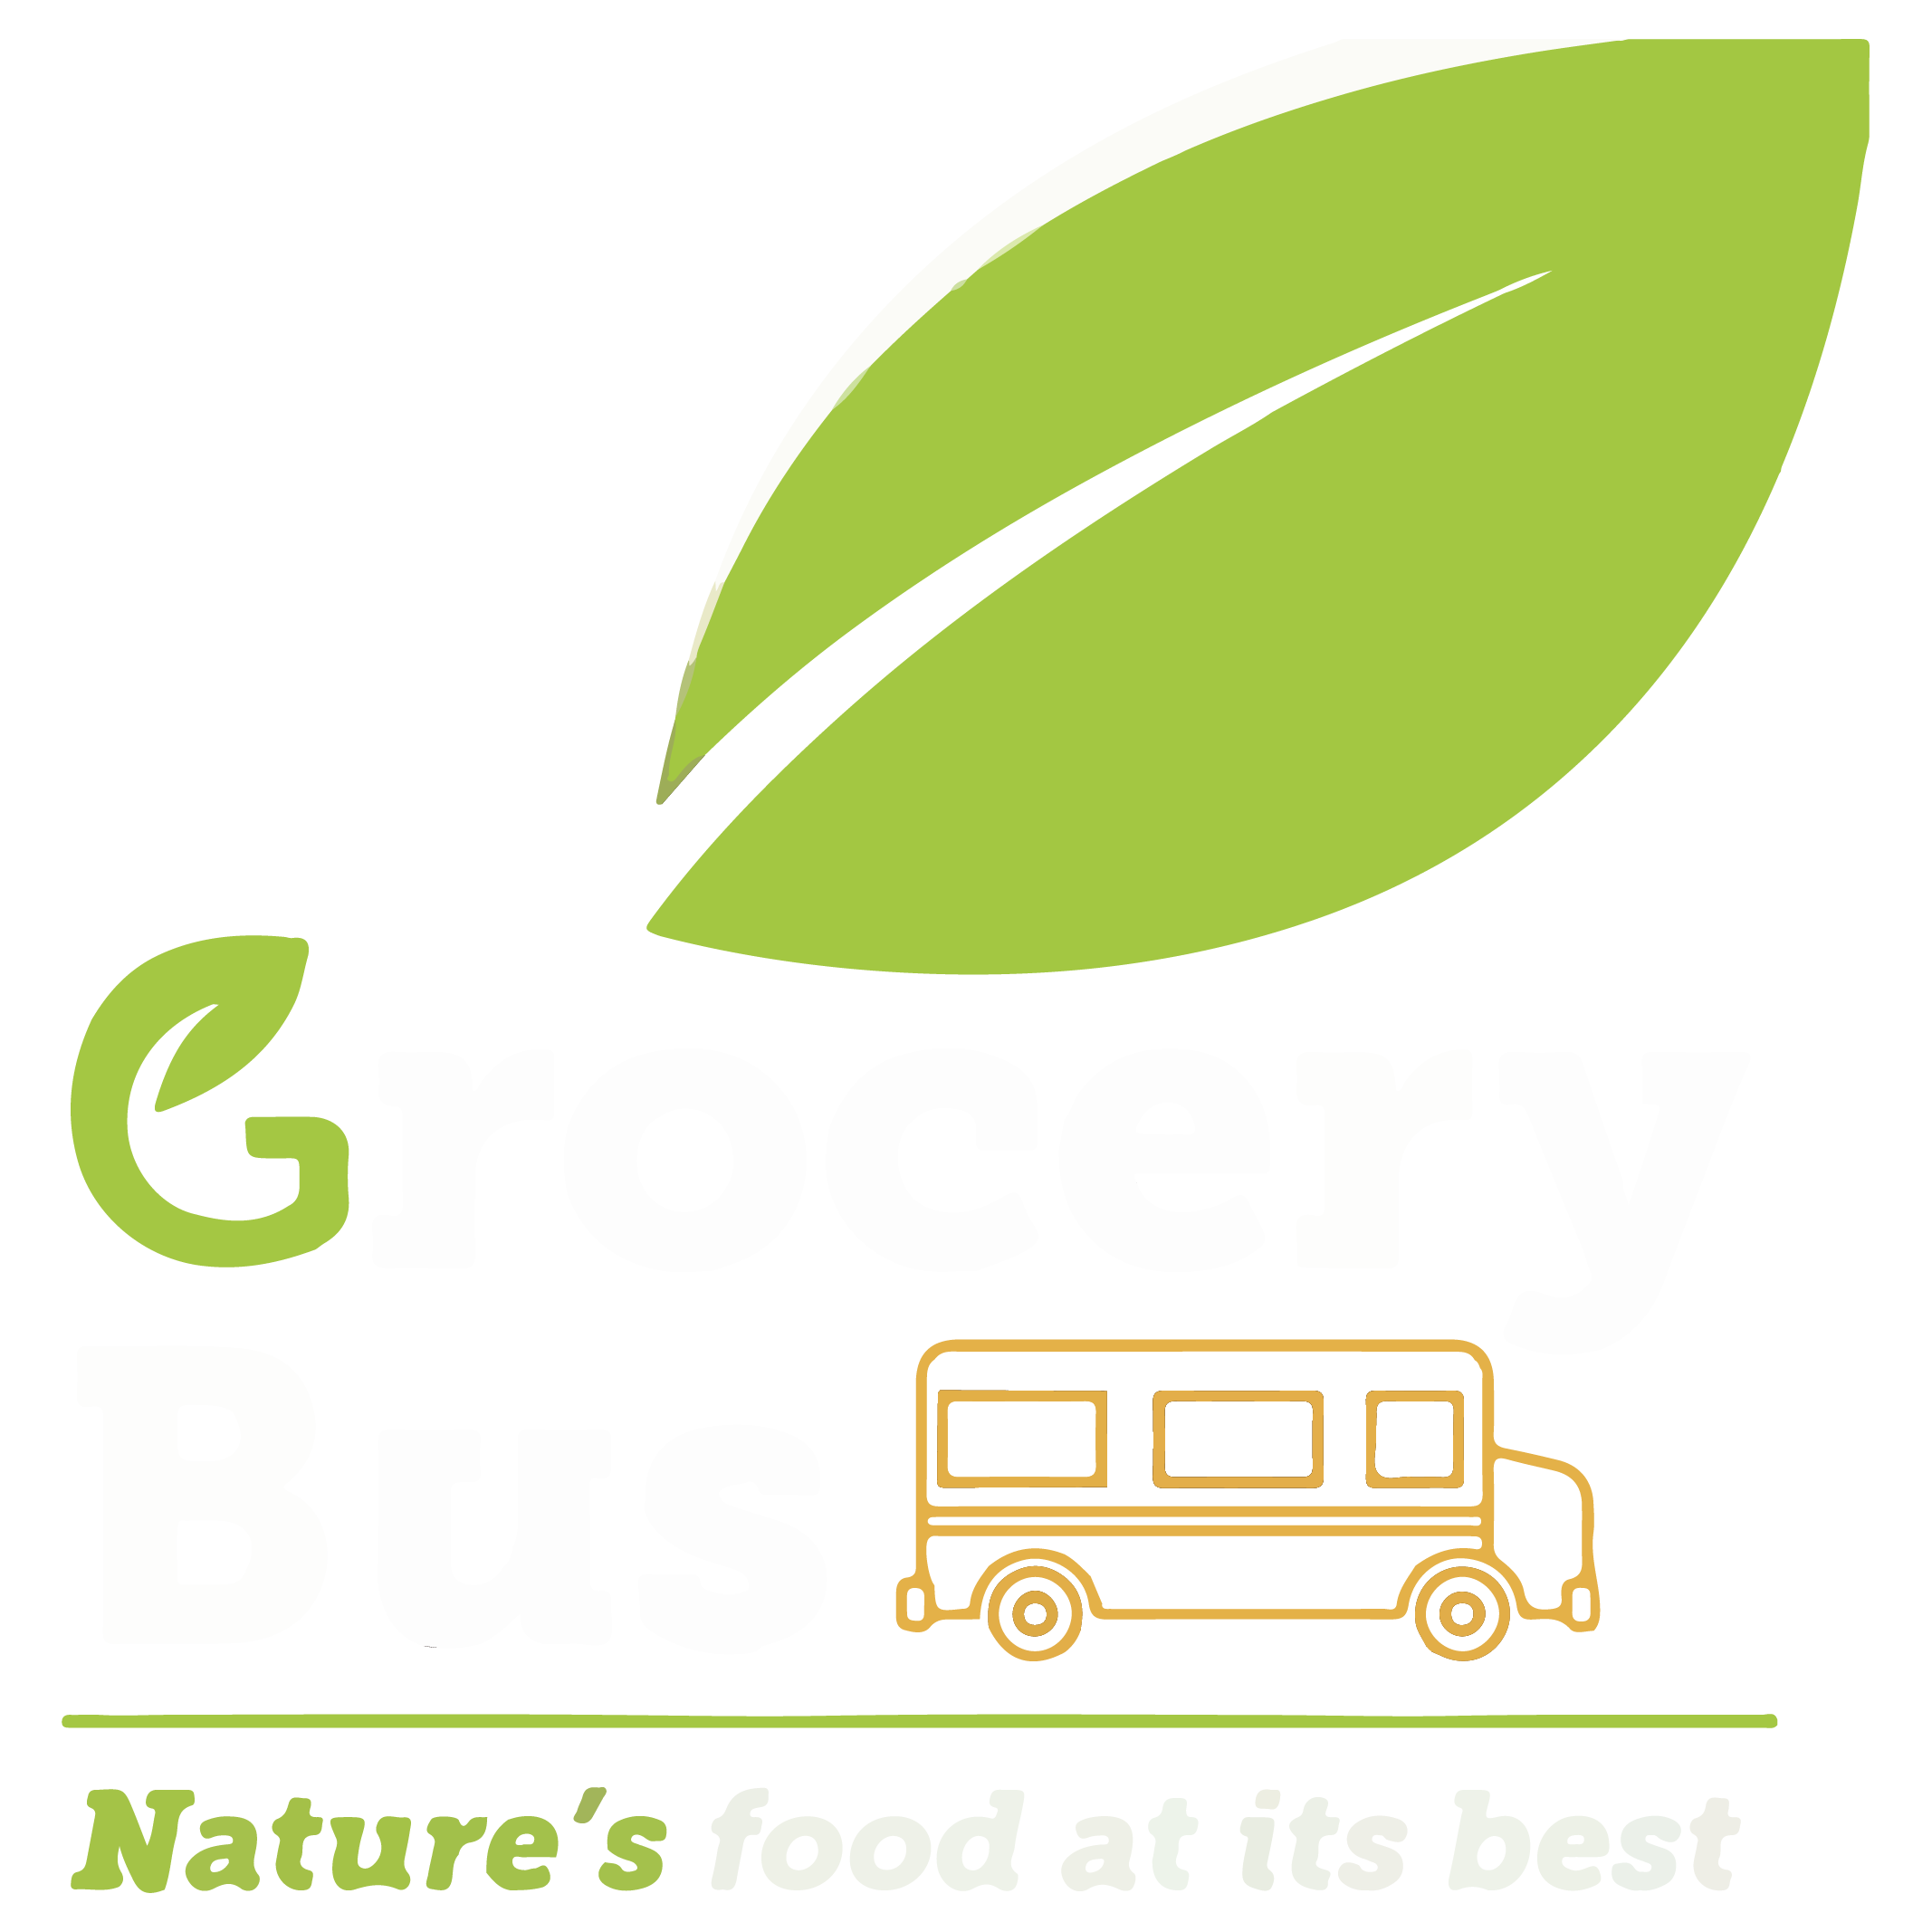 GROCERY BUS